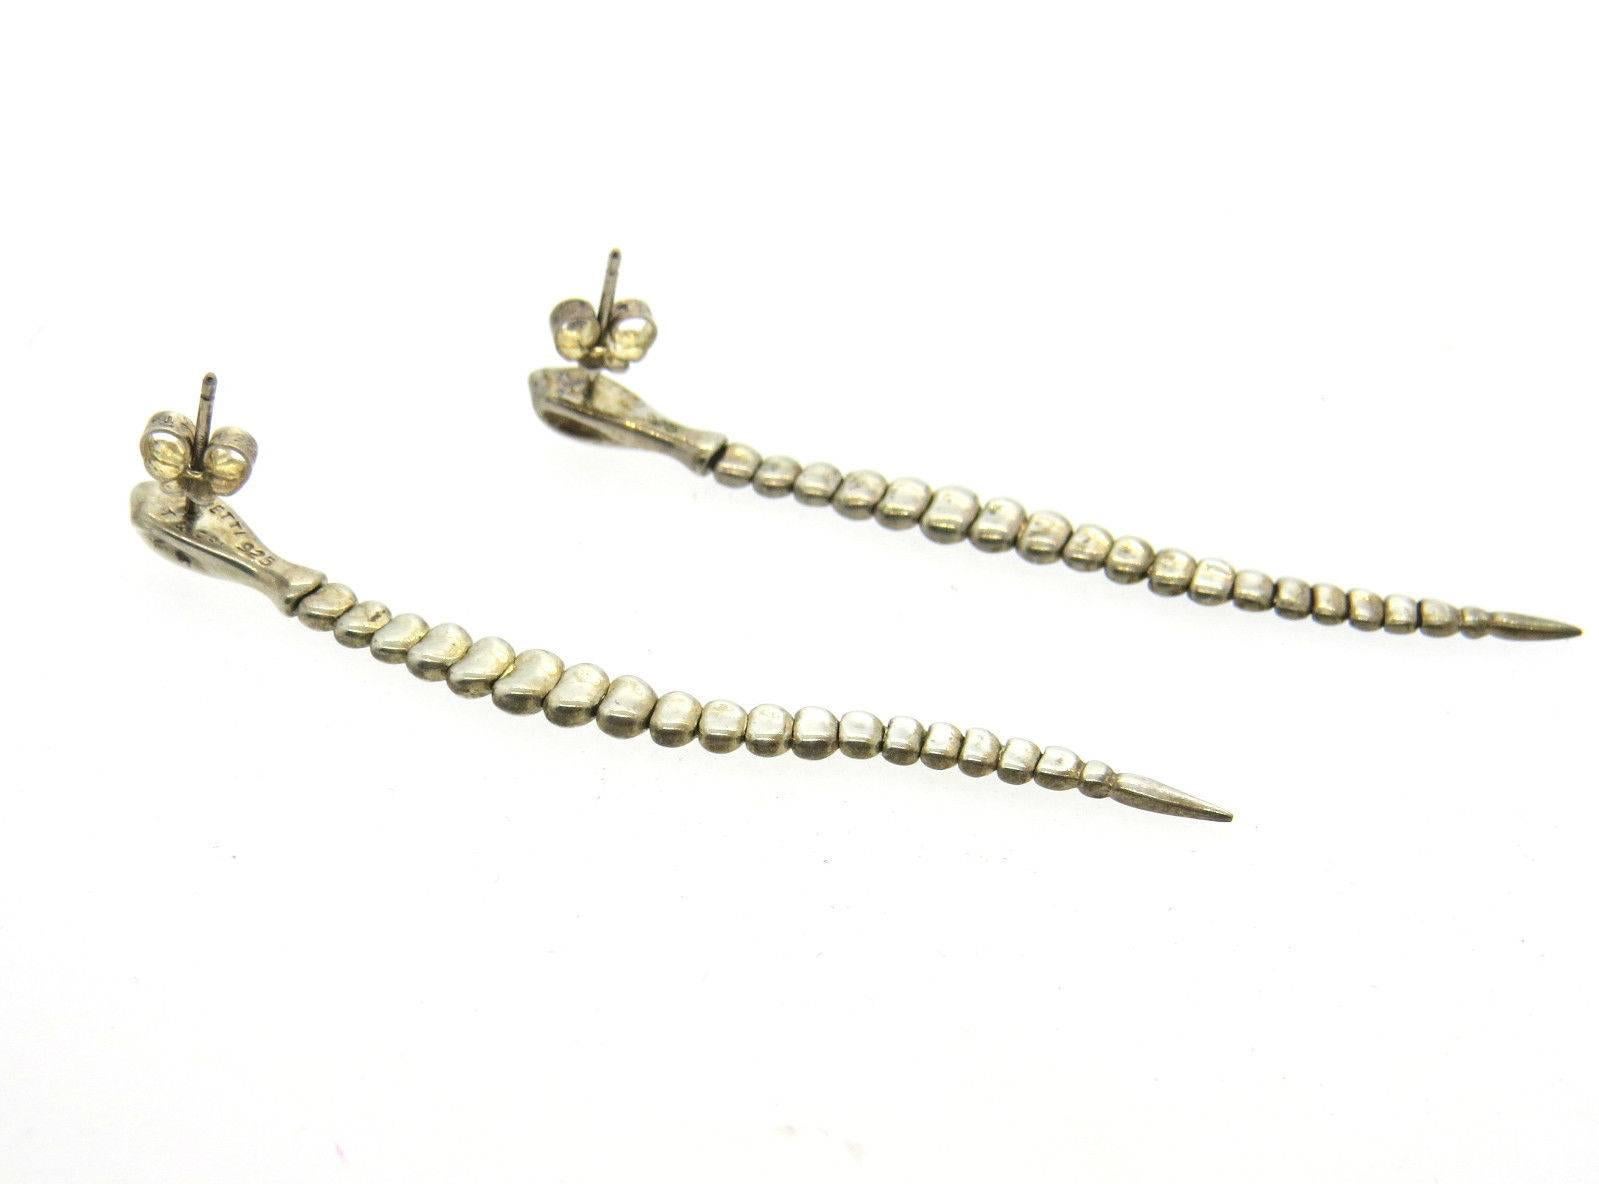 A pair of sterling silver earrings depicting snakes.  Crafted by Elsa Peretti for Tiffany & Co., the earrings are 71mm long and 5.4mm wide.  Marked: T & Co, 925, Peretti.  The weight of the earrings is 7.4 grams.